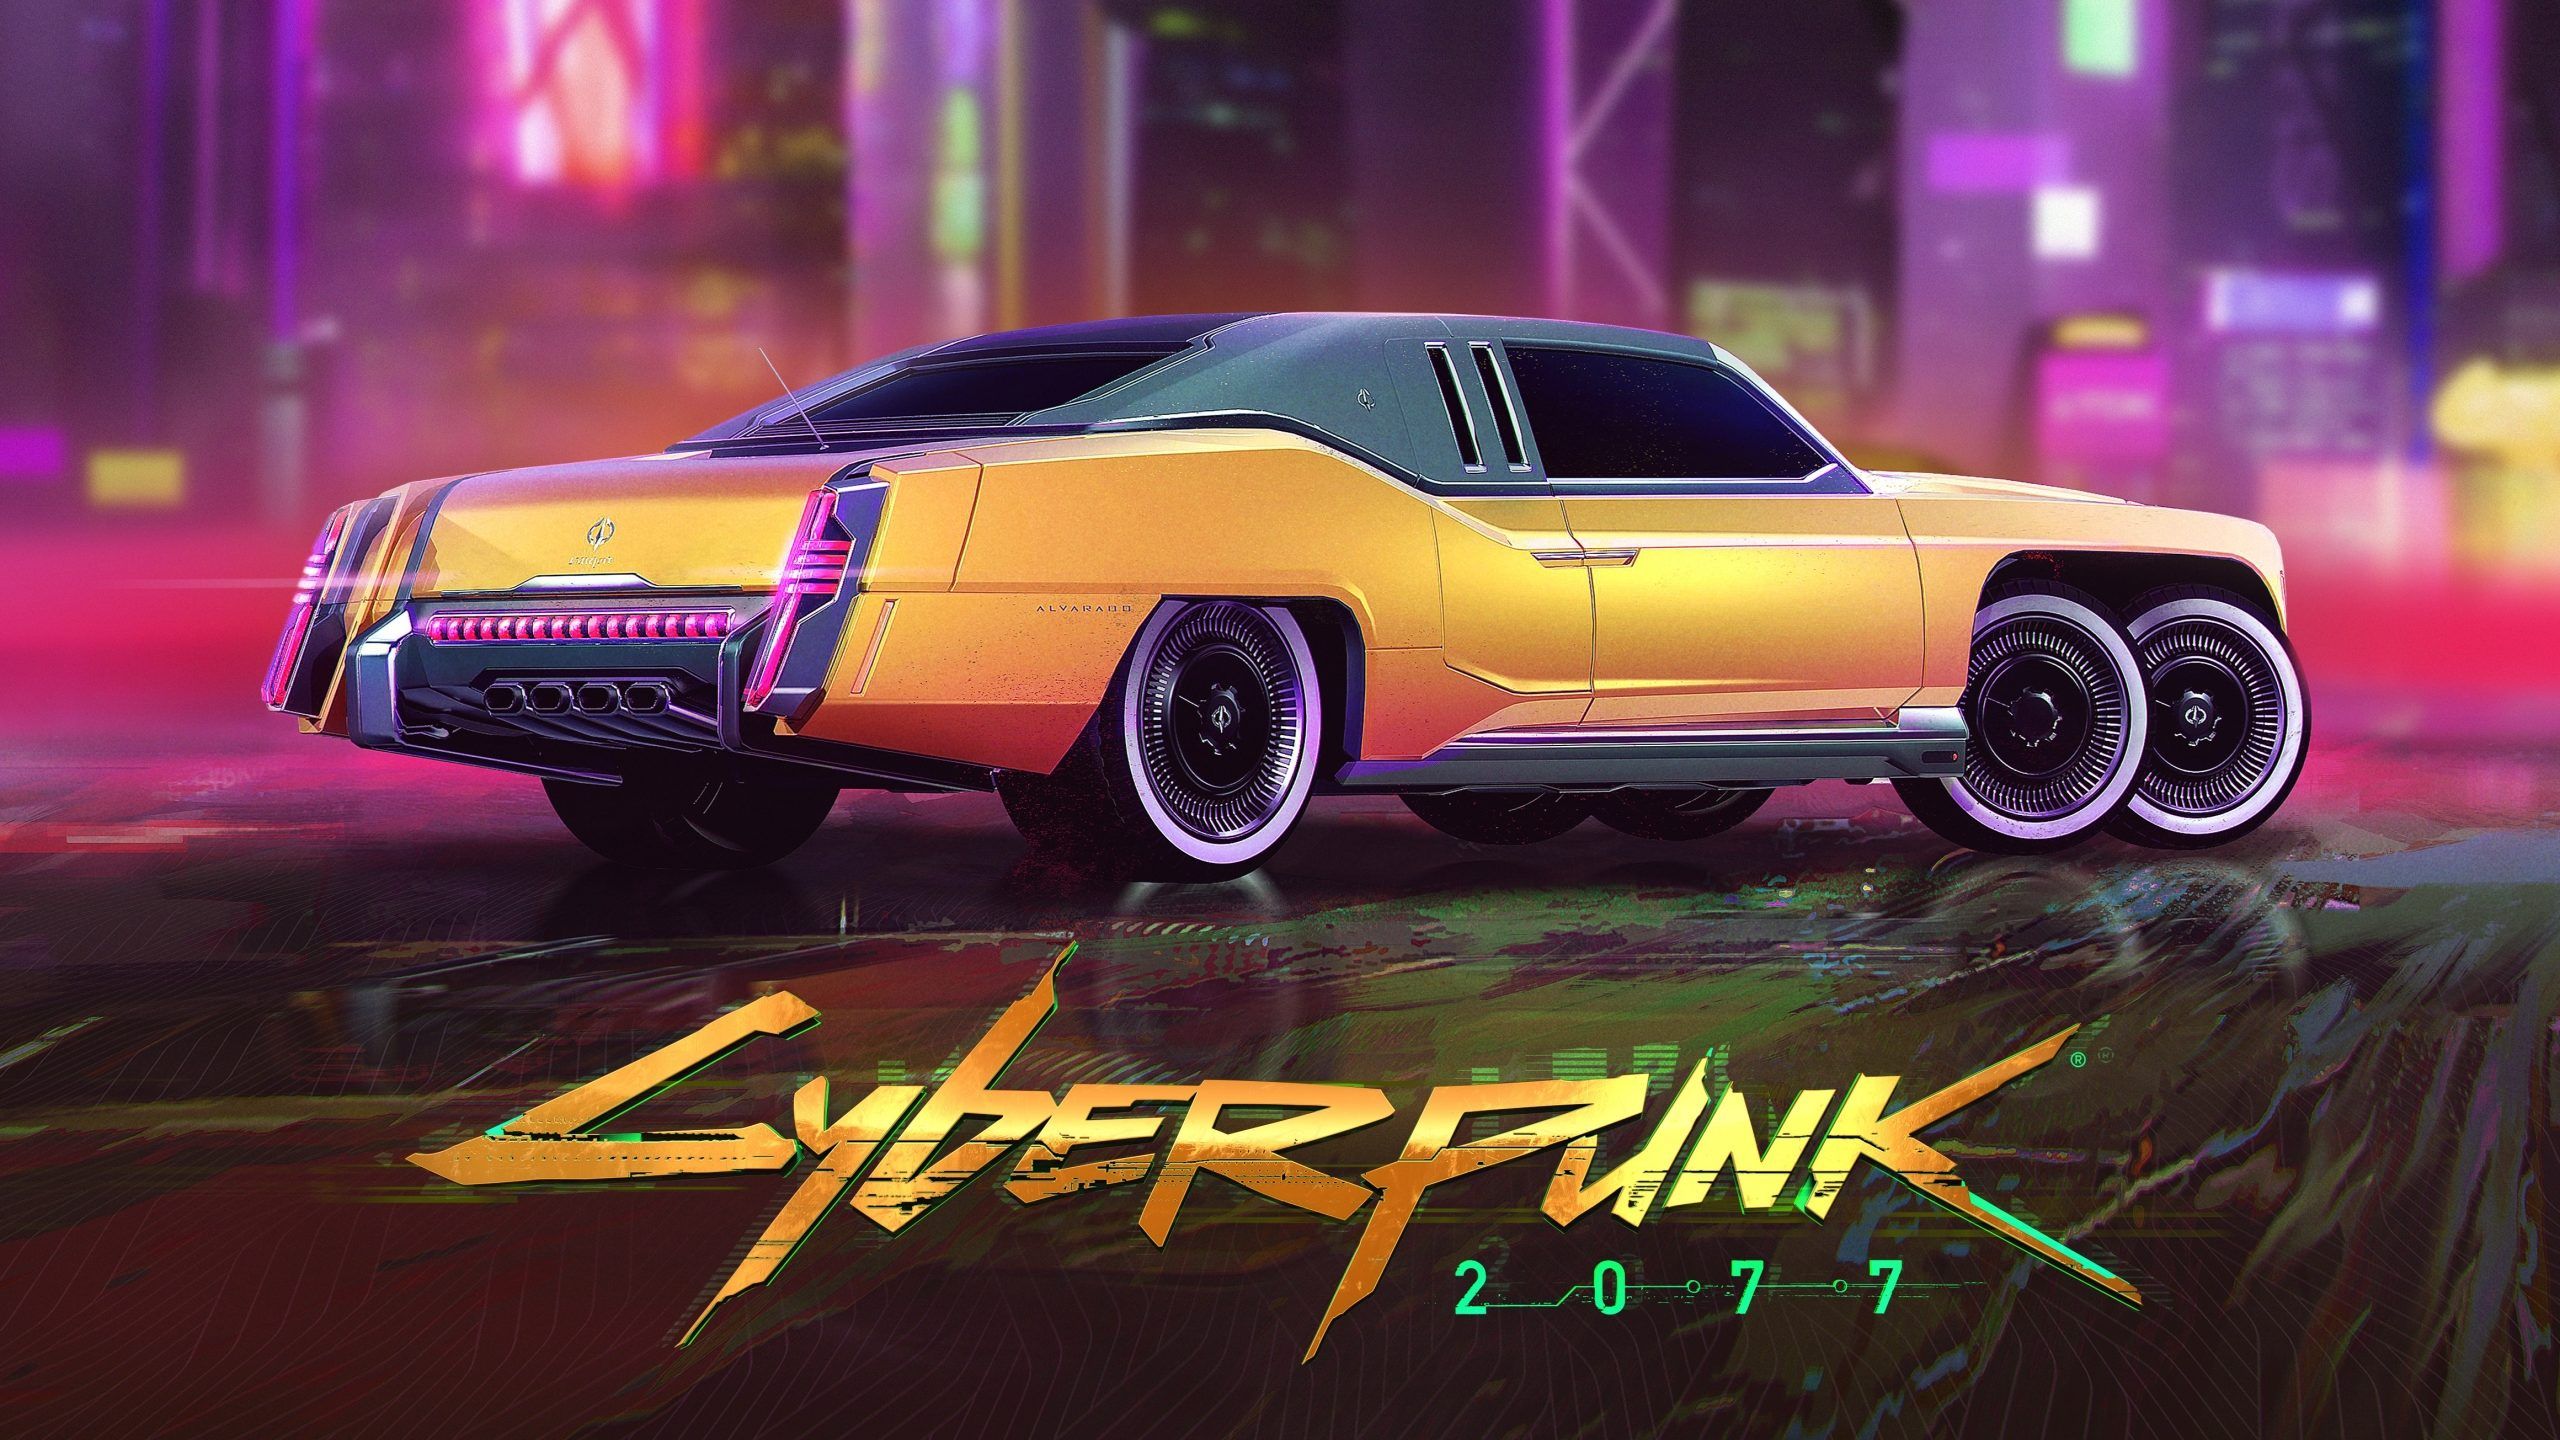 Cyberpunk 2077 Pre Order Release Date: Gameplay To Have Better And Realistic Cars Than GTA